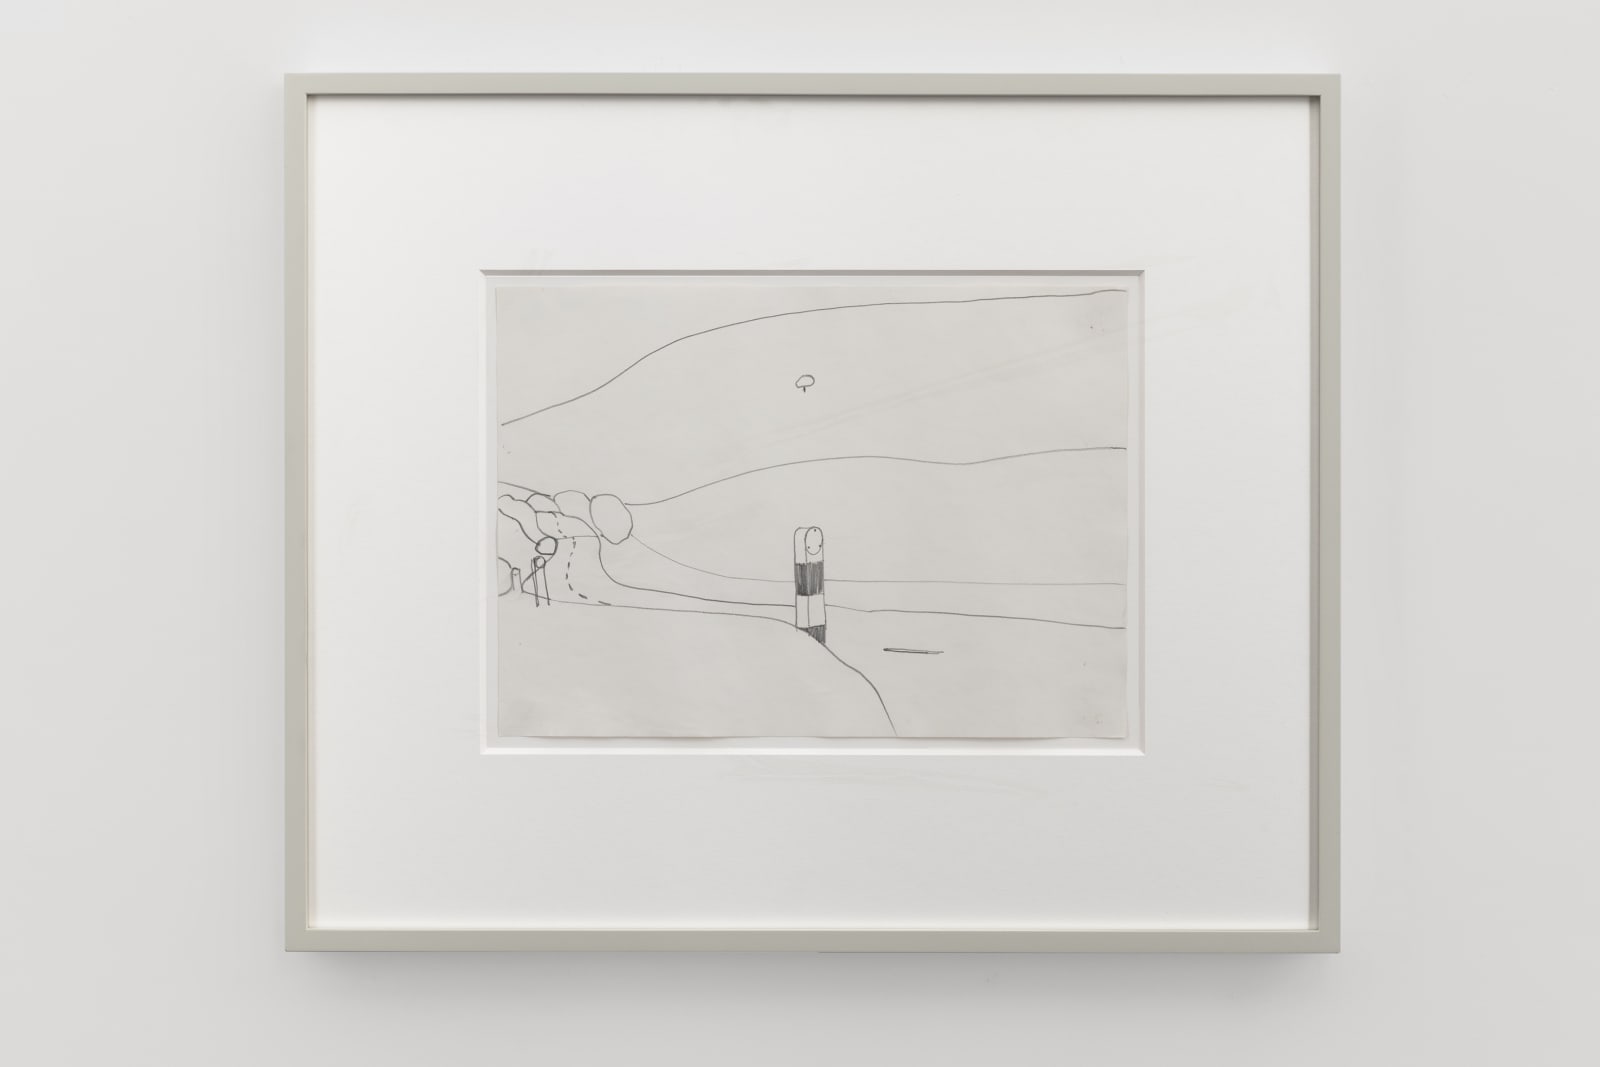 Landscape Drawing, 1967 signed, dated on verso pencil on paper 25.3 x 35.5 cm. 10 x 14 in.